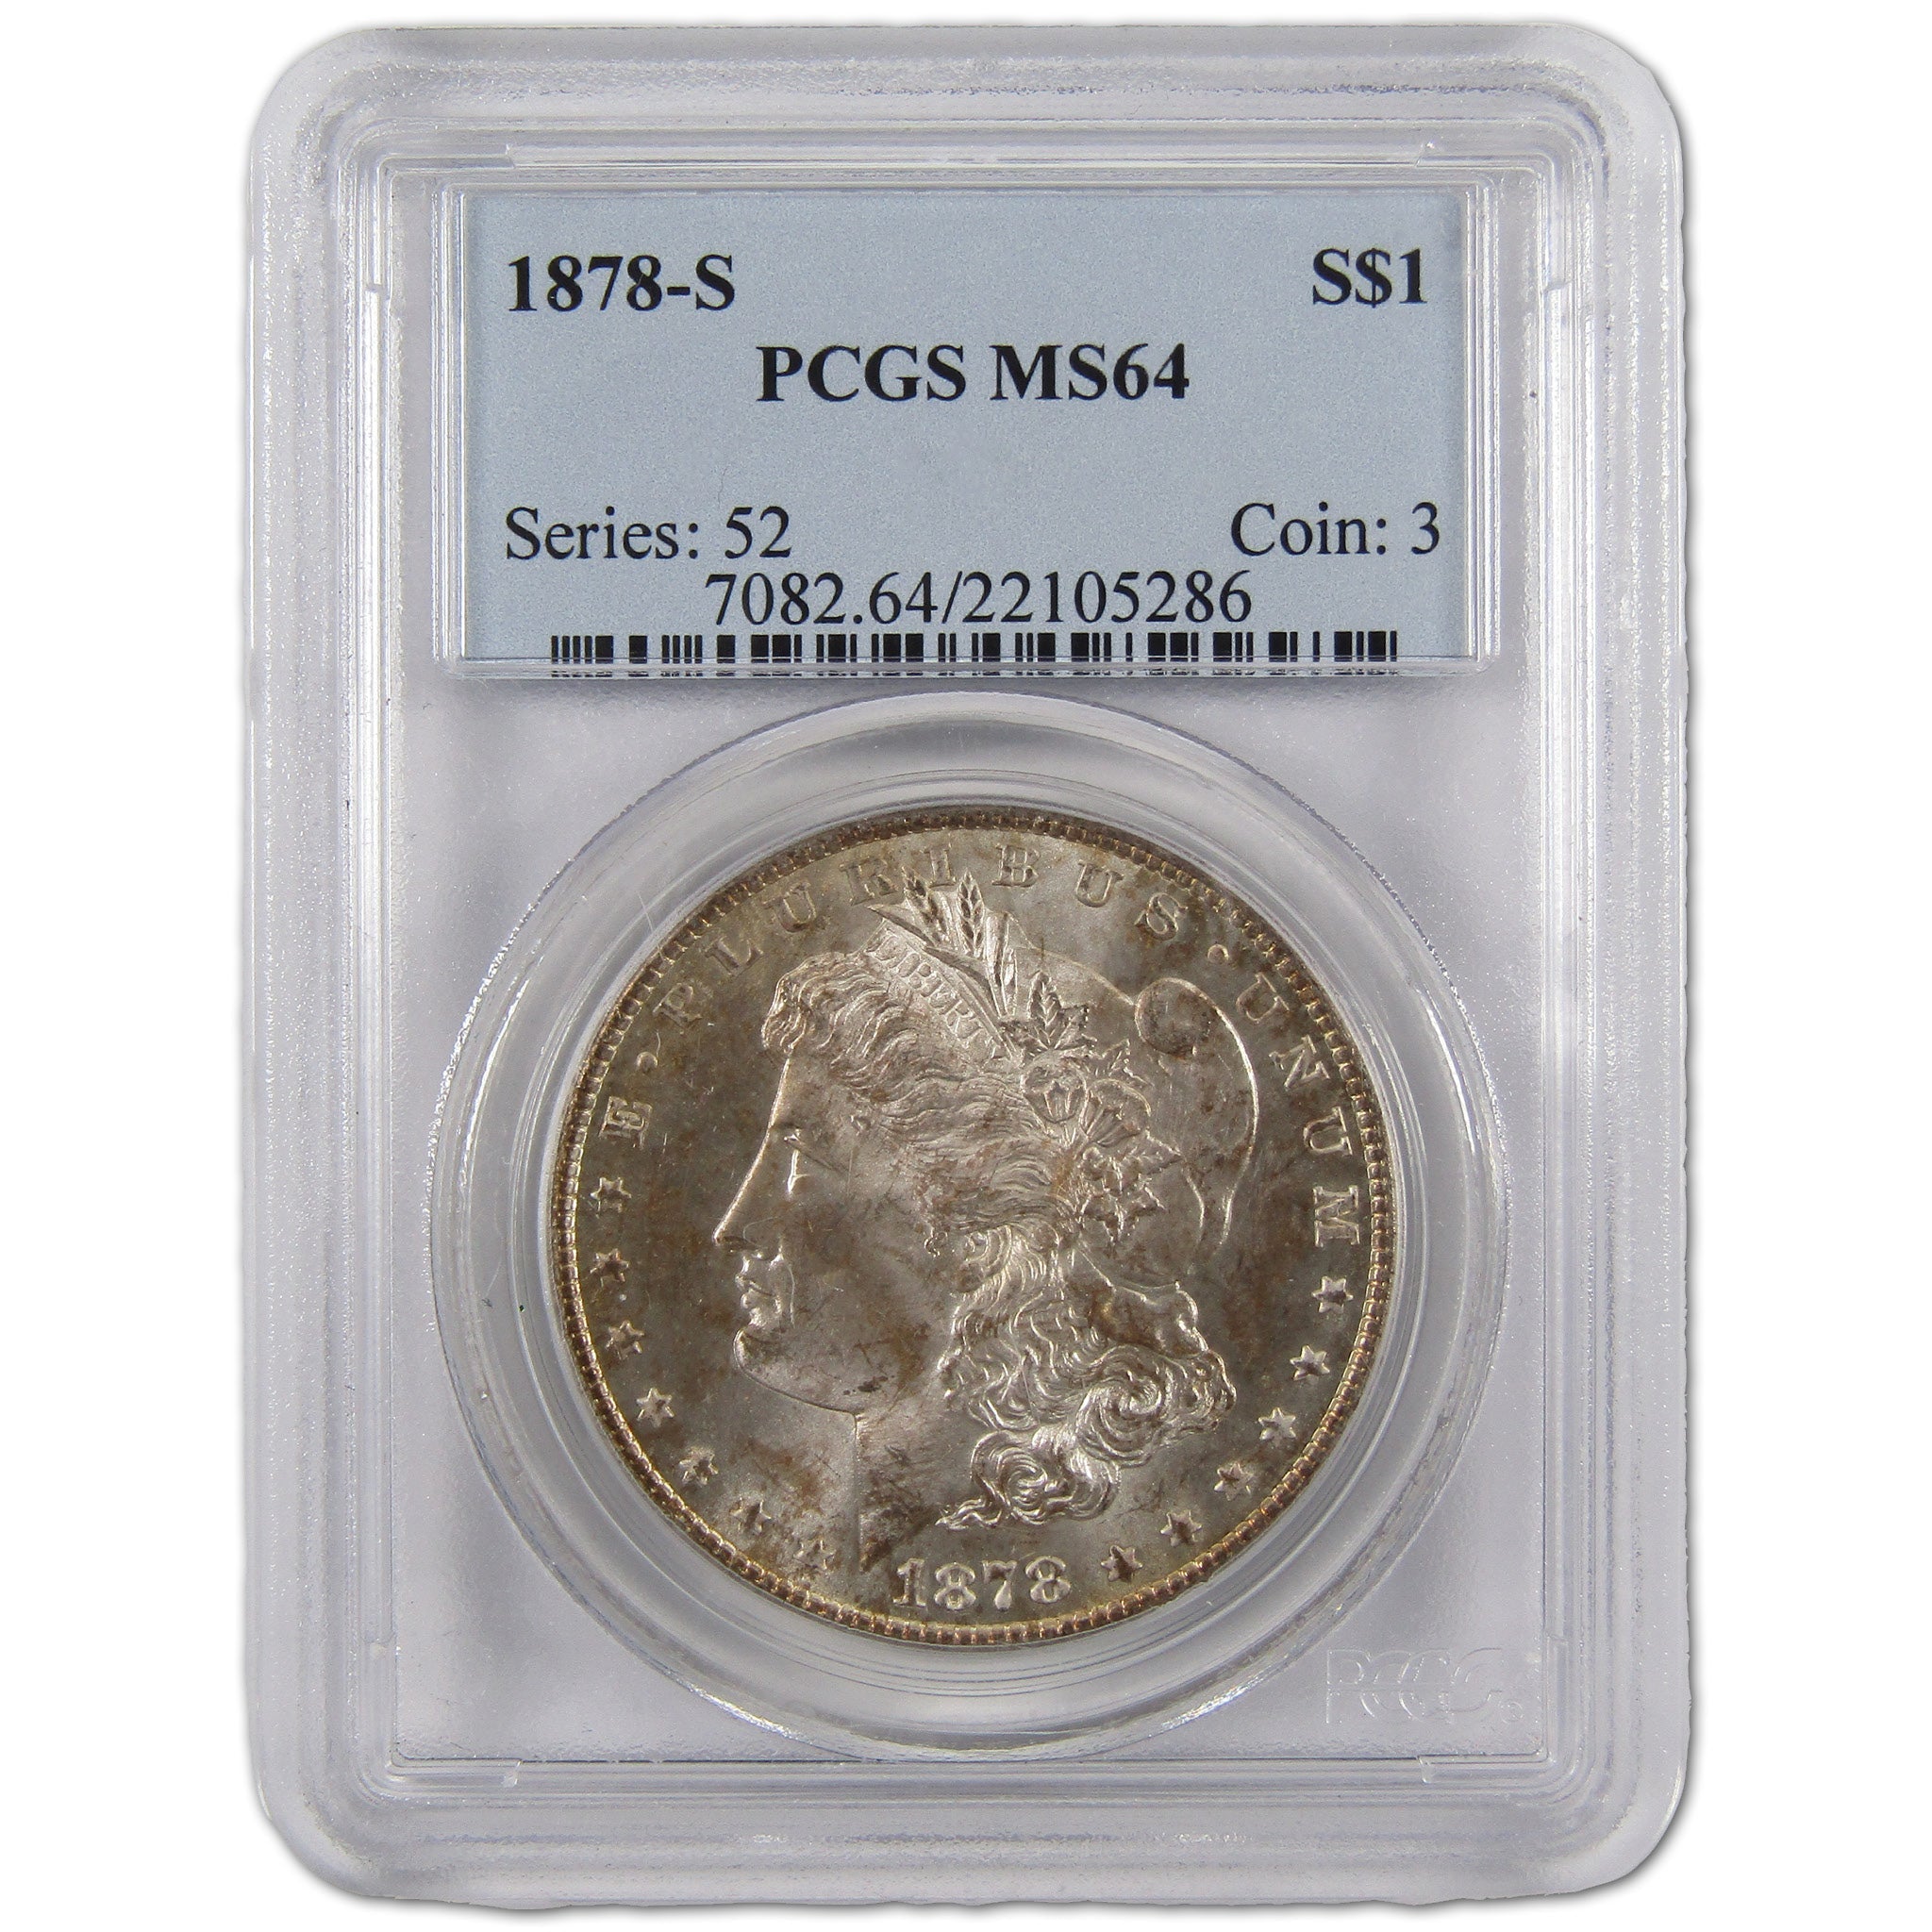 1878 S Morgan Dollar MS 64 PCGS Silver $1 Uncirculated Coin SKU:I10890 - Morgan coin - Morgan silver dollar - Morgan silver dollar for sale - Profile Coins &amp; Collectibles